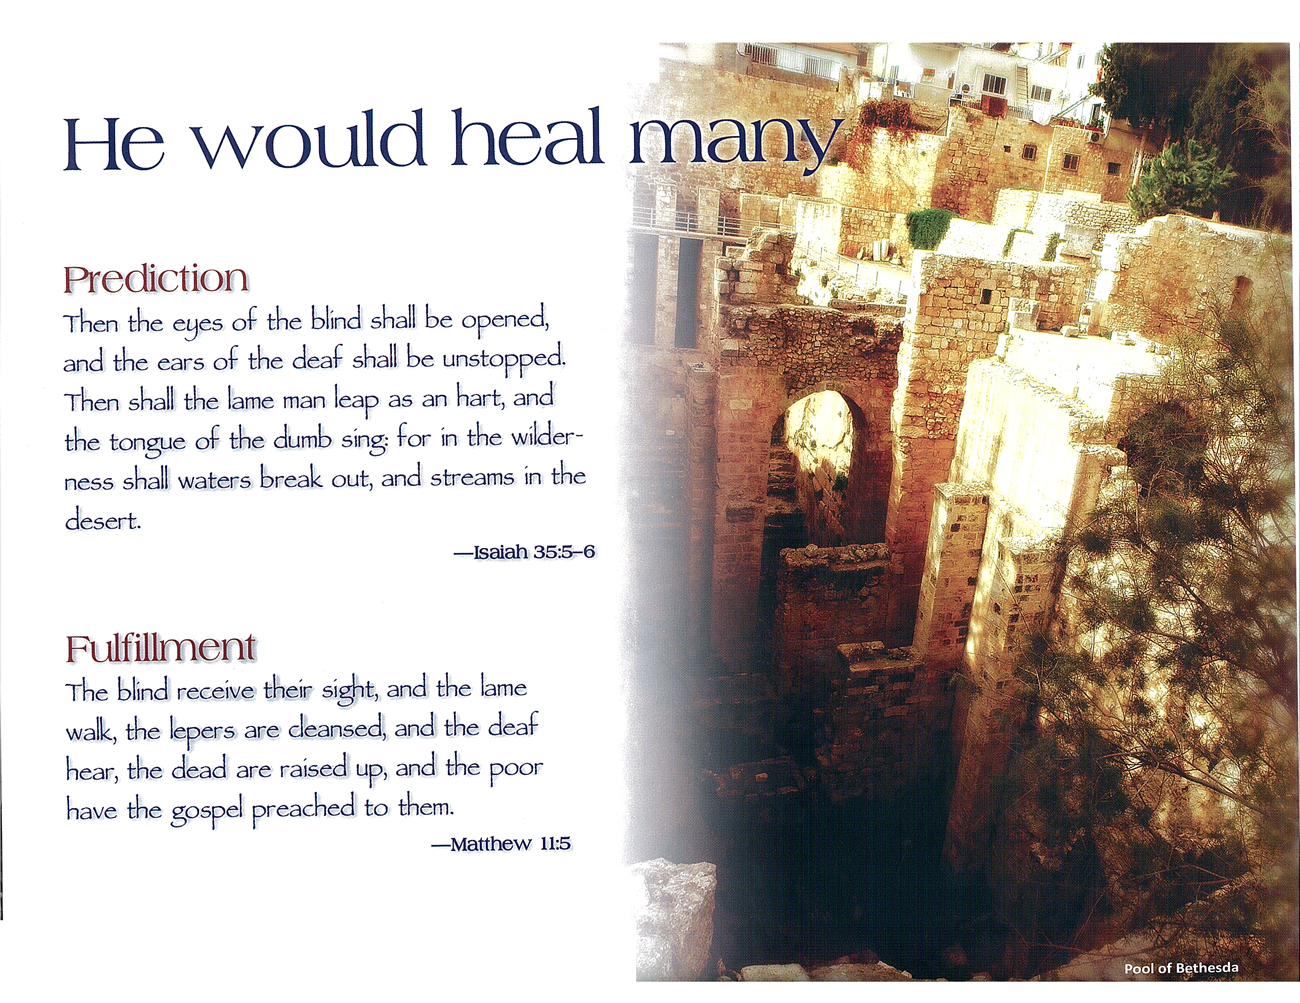 2010 Prophecy Calendar: April - He would heal many